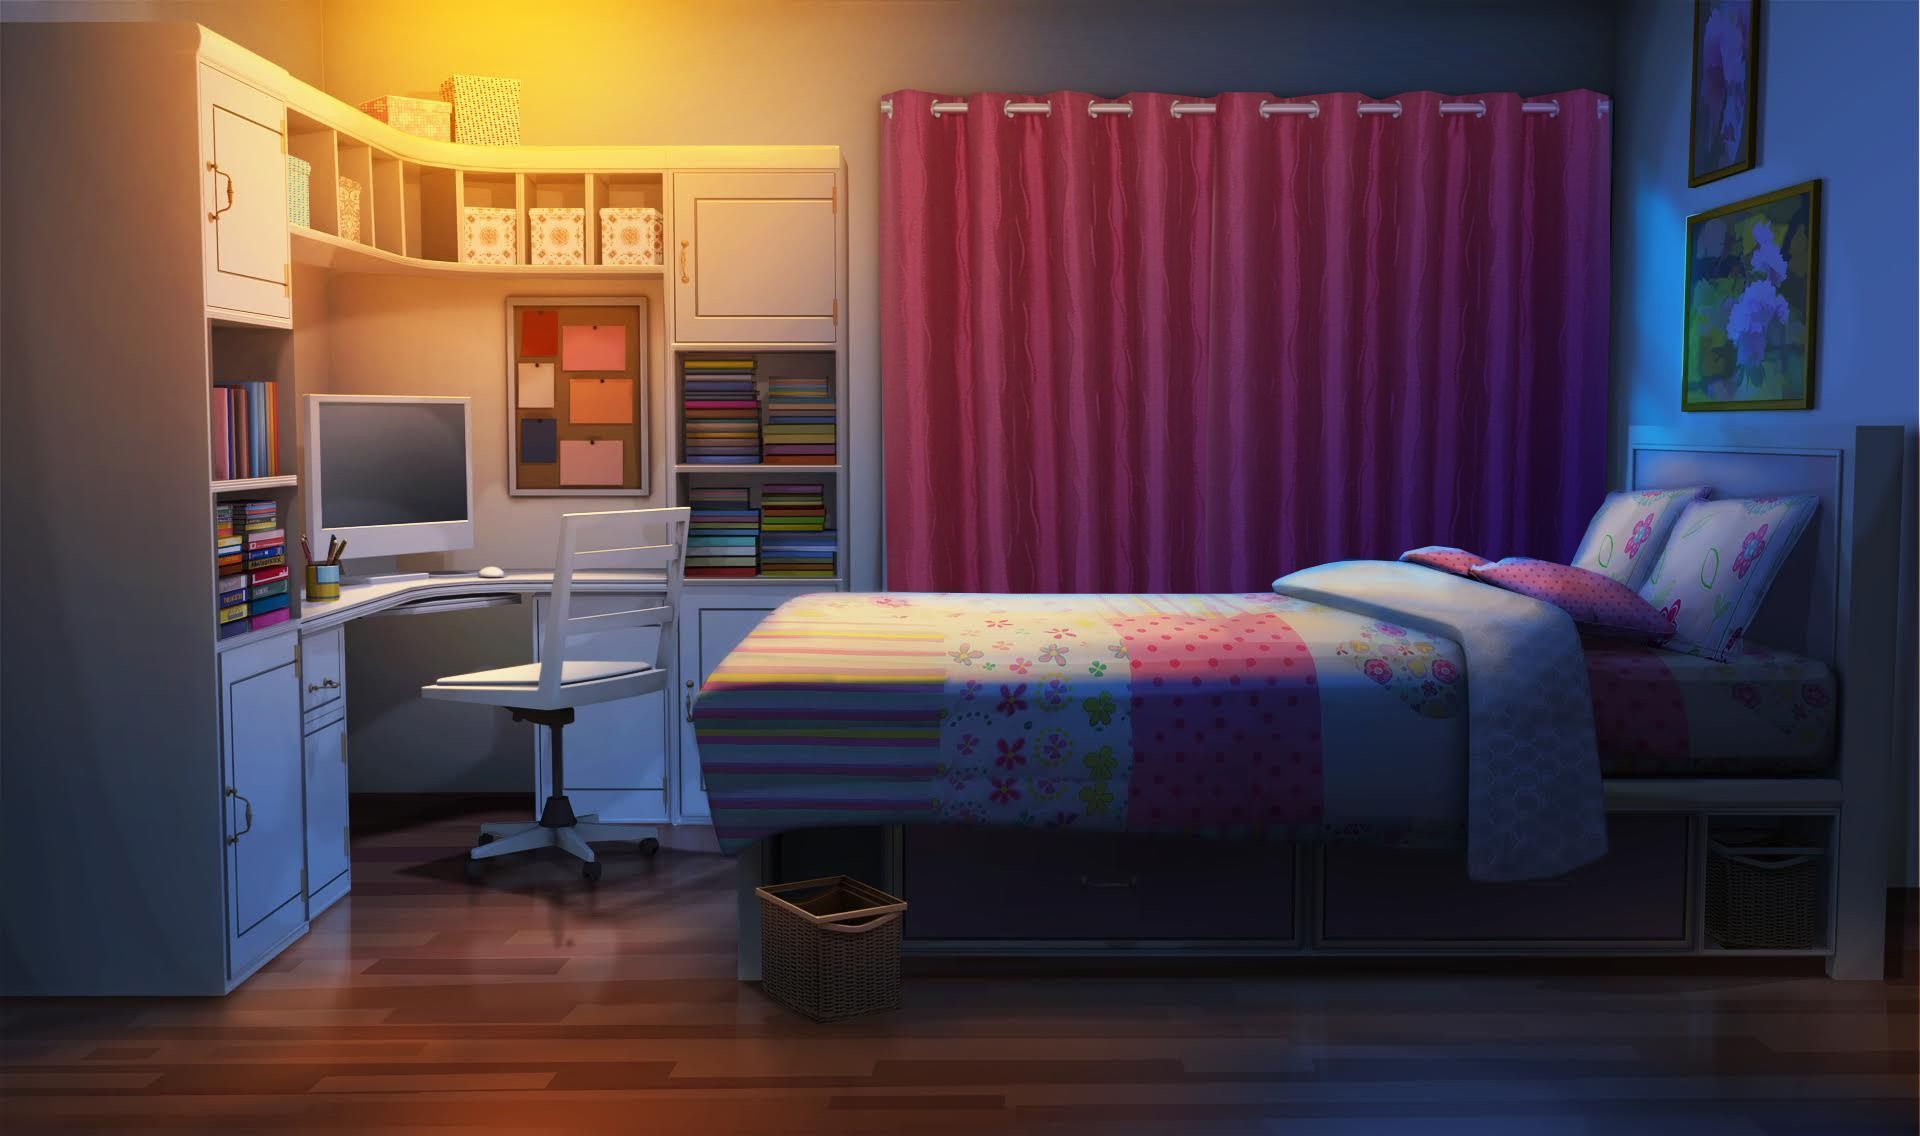 How to Create an Anime Aesthetic Room (+ Inspo) | The Other Aesthetic